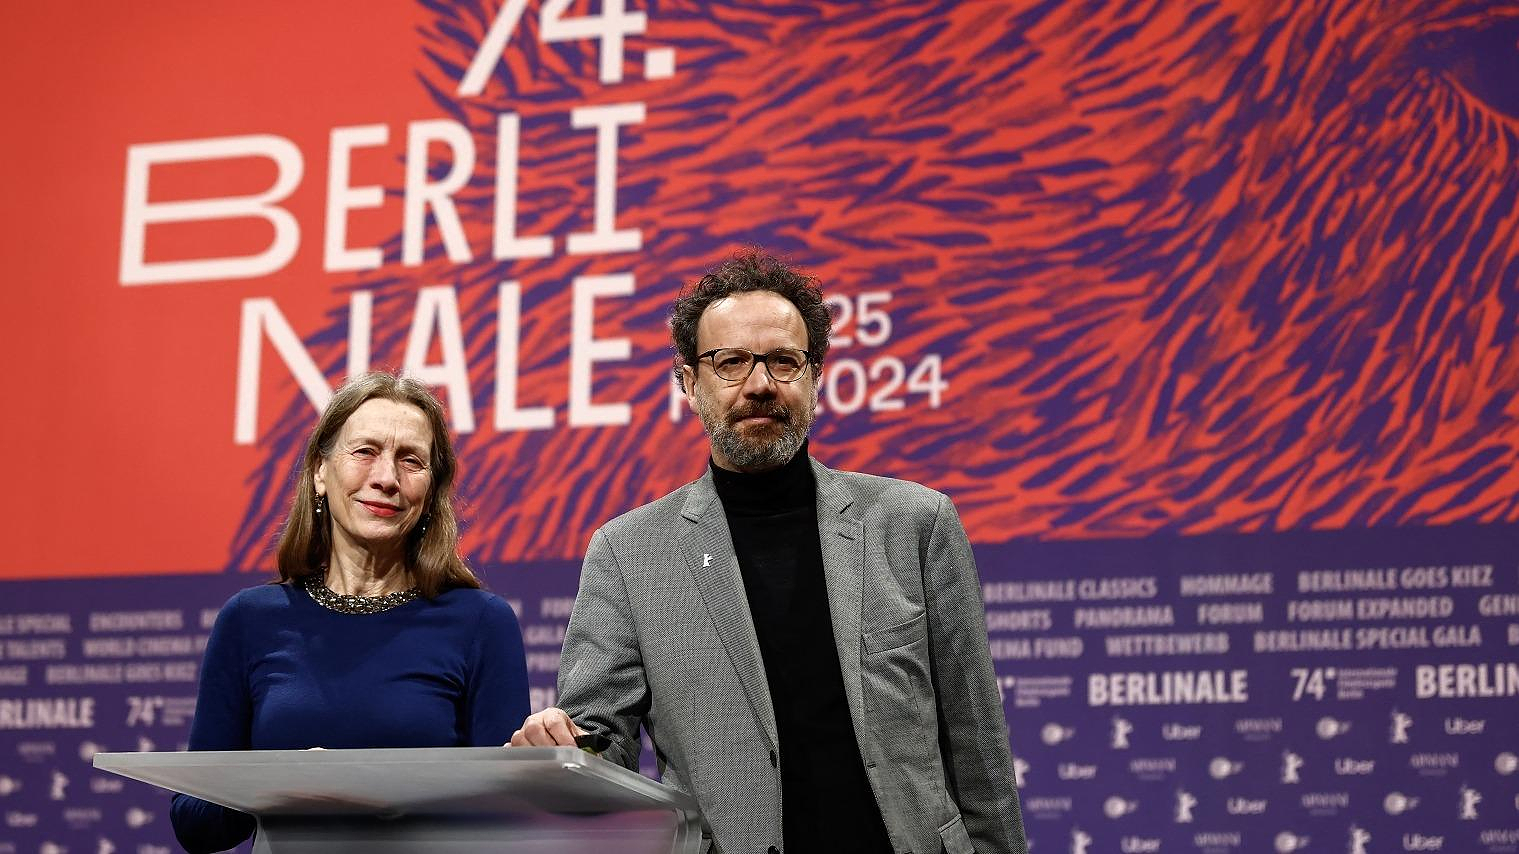 Cinema: the Berlinale disinvites elected officials from the German far-right party